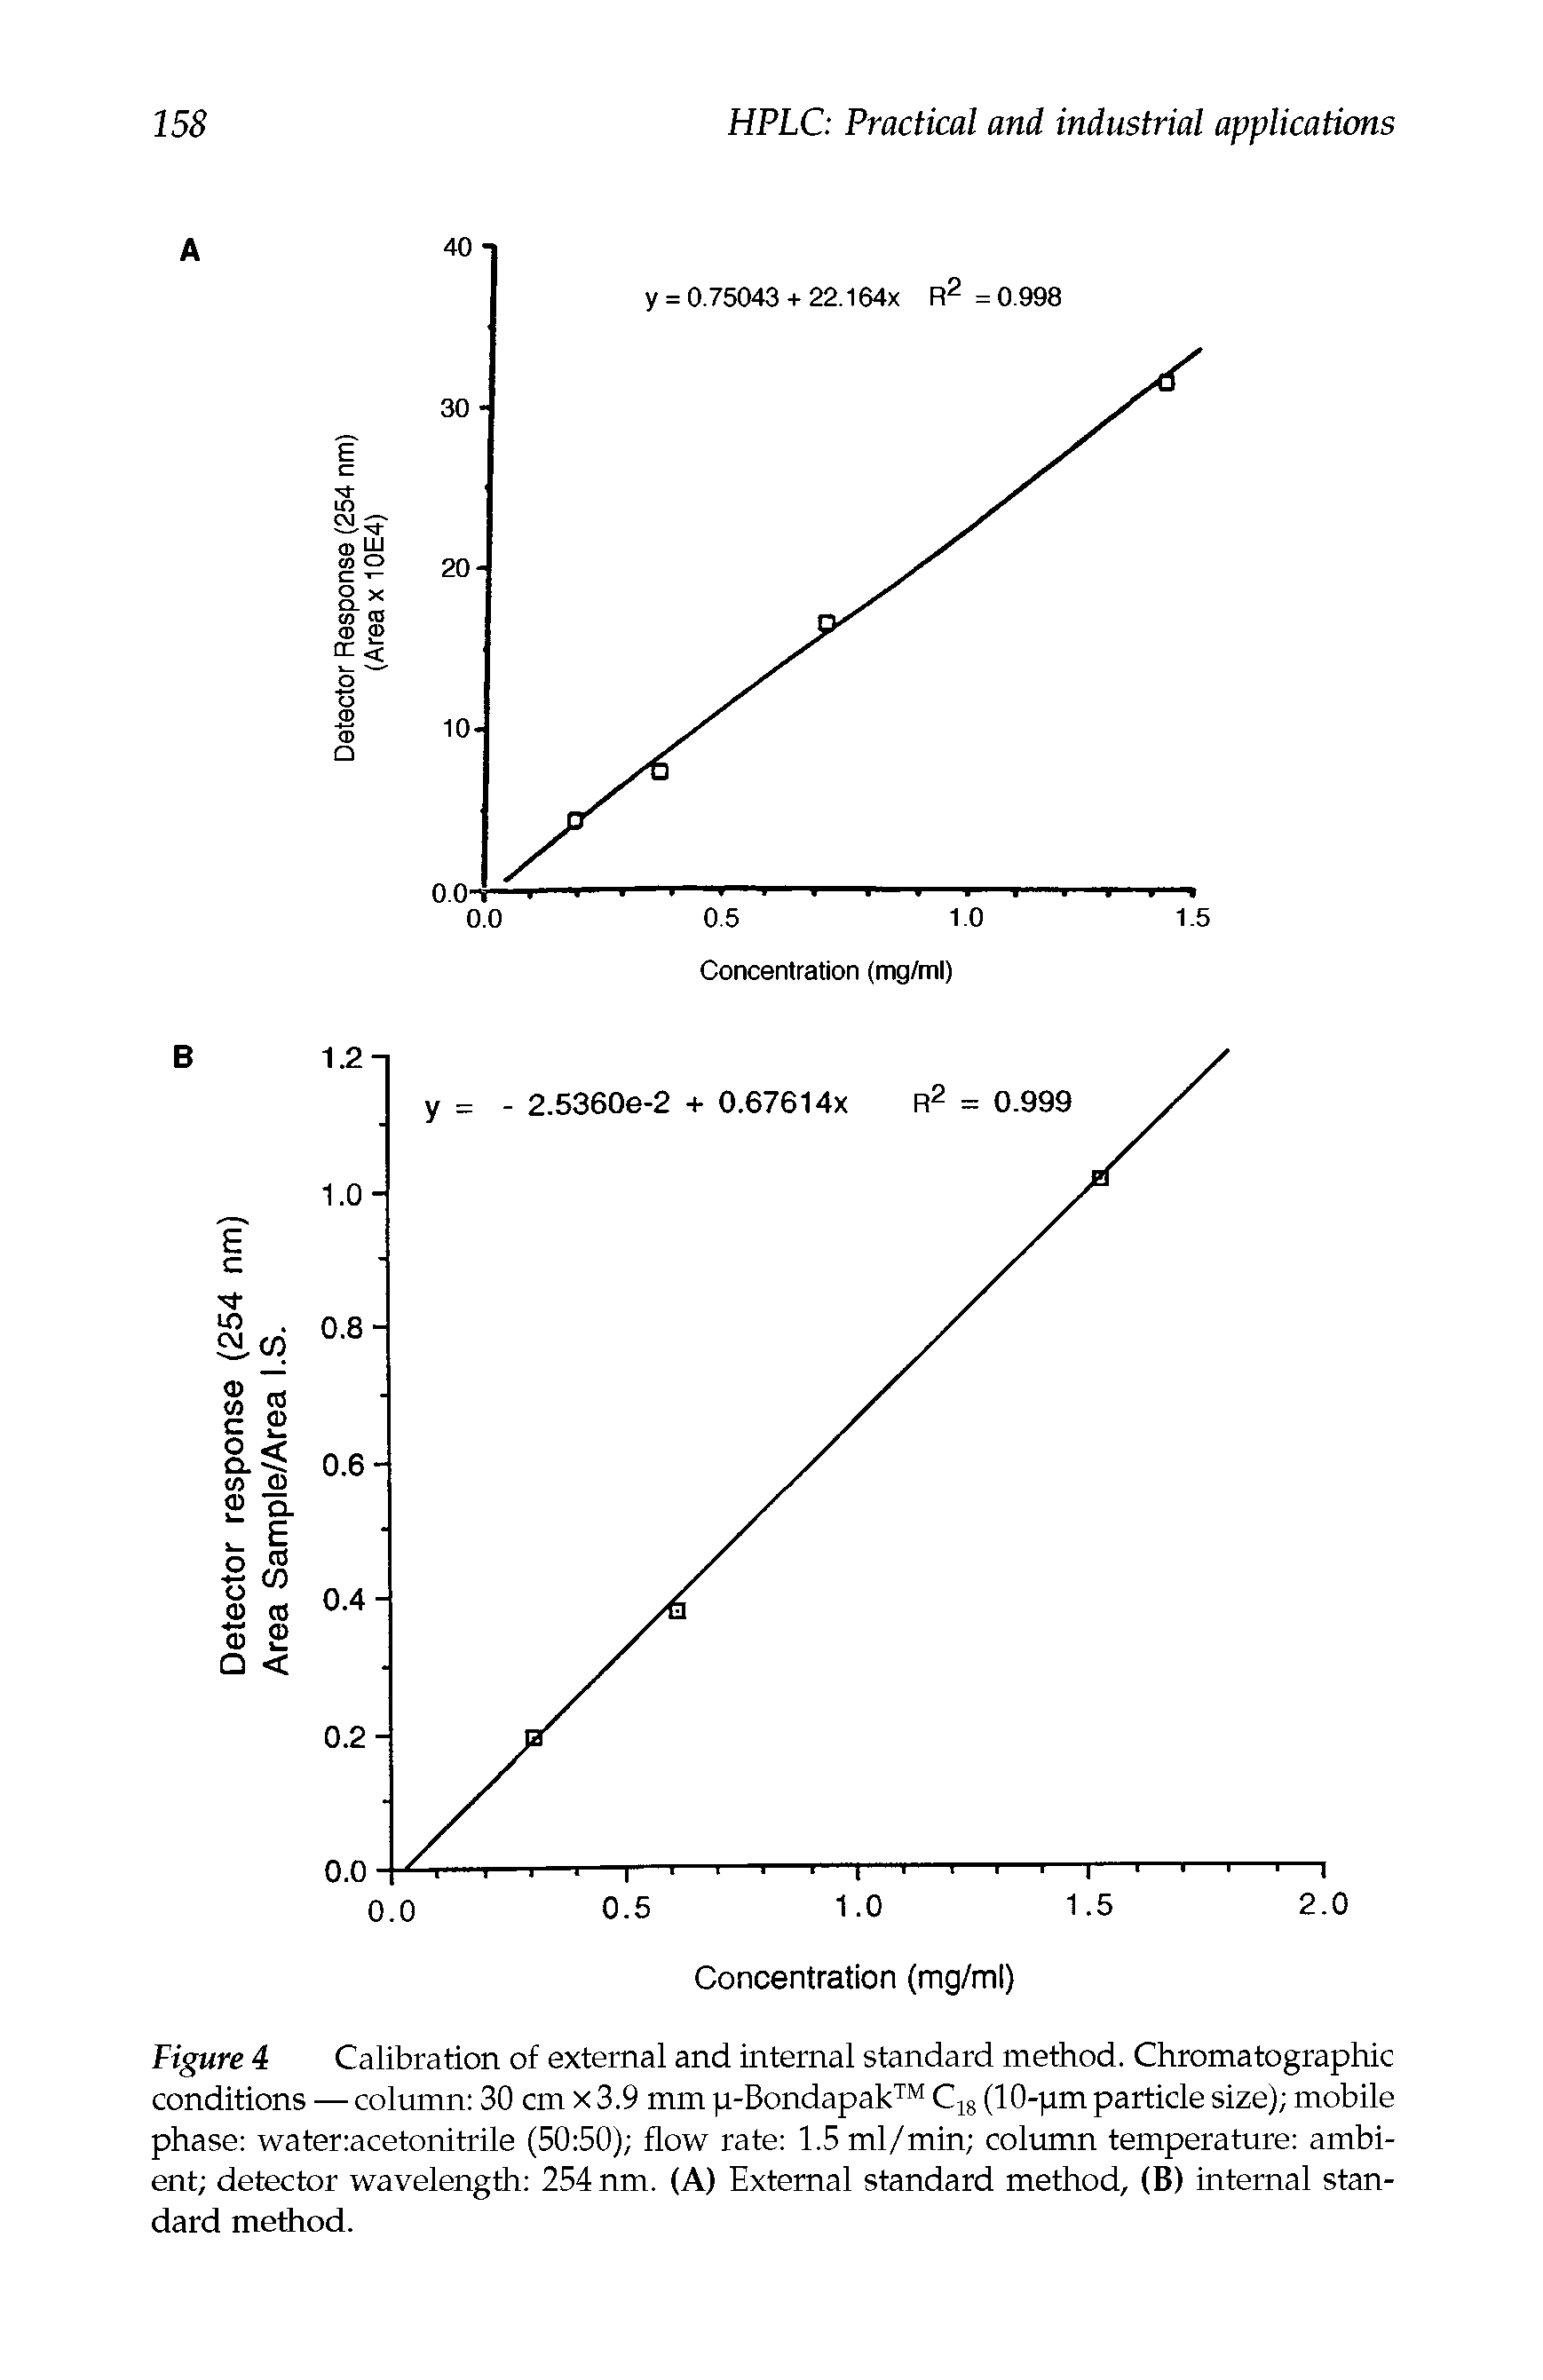 Figure 4 Calibration of external and internal standard method. Chromatographic conditions — column 30 cm x 3.9 mm p-Bondapak C18 (10-pm particle size) mobile phase water acetonitrile (50 50) flow rate 1.5 ml/min column temperature ambient detector wavelength 254 nm. (A) External standard method, (B) internal standard method.